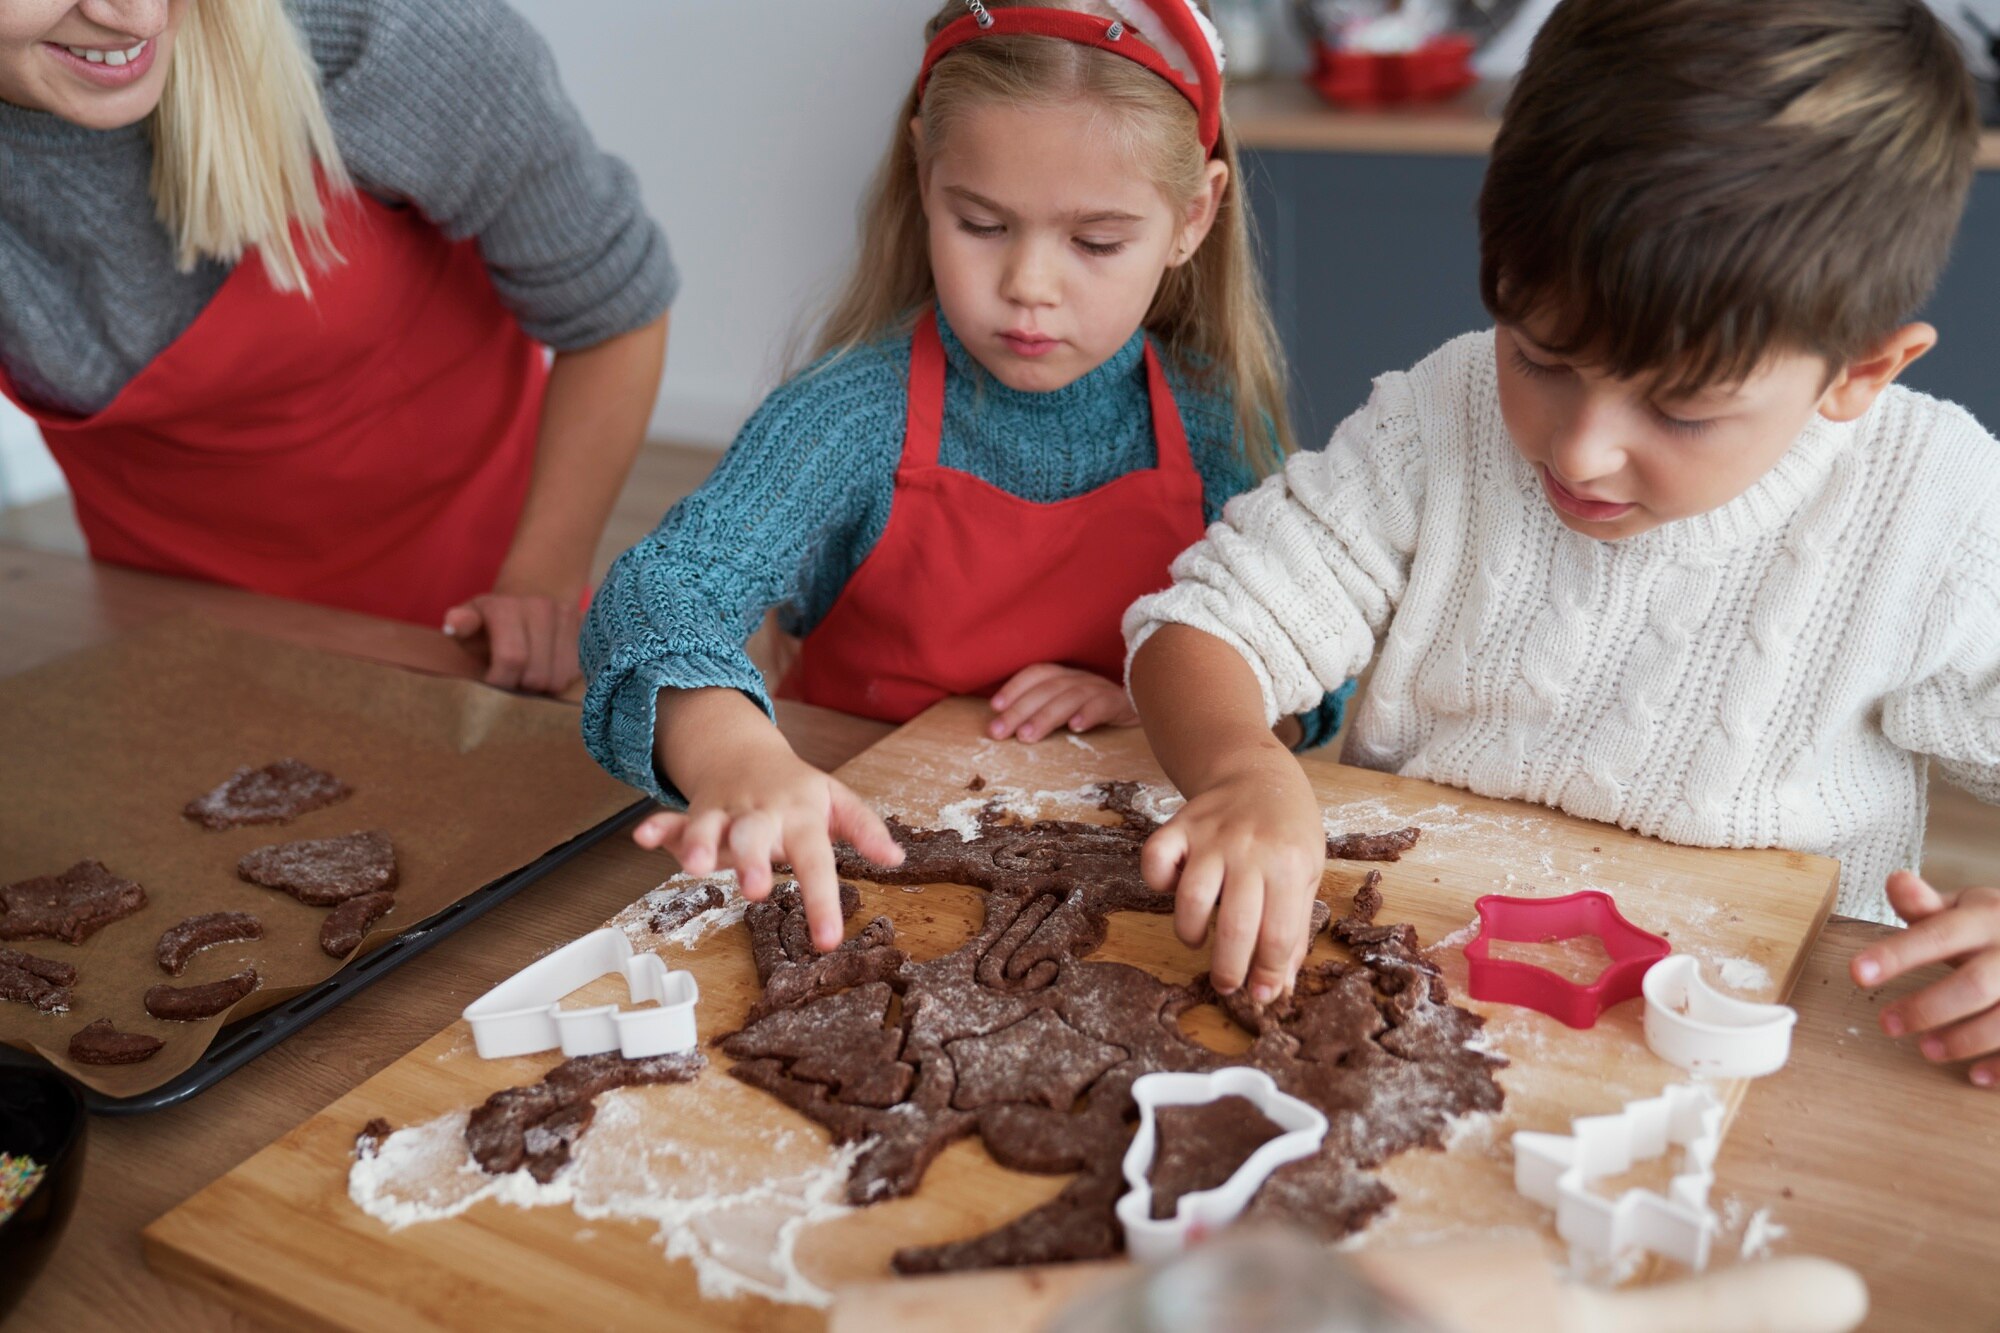 Find Out: How Many Brownies Does a Box Make?